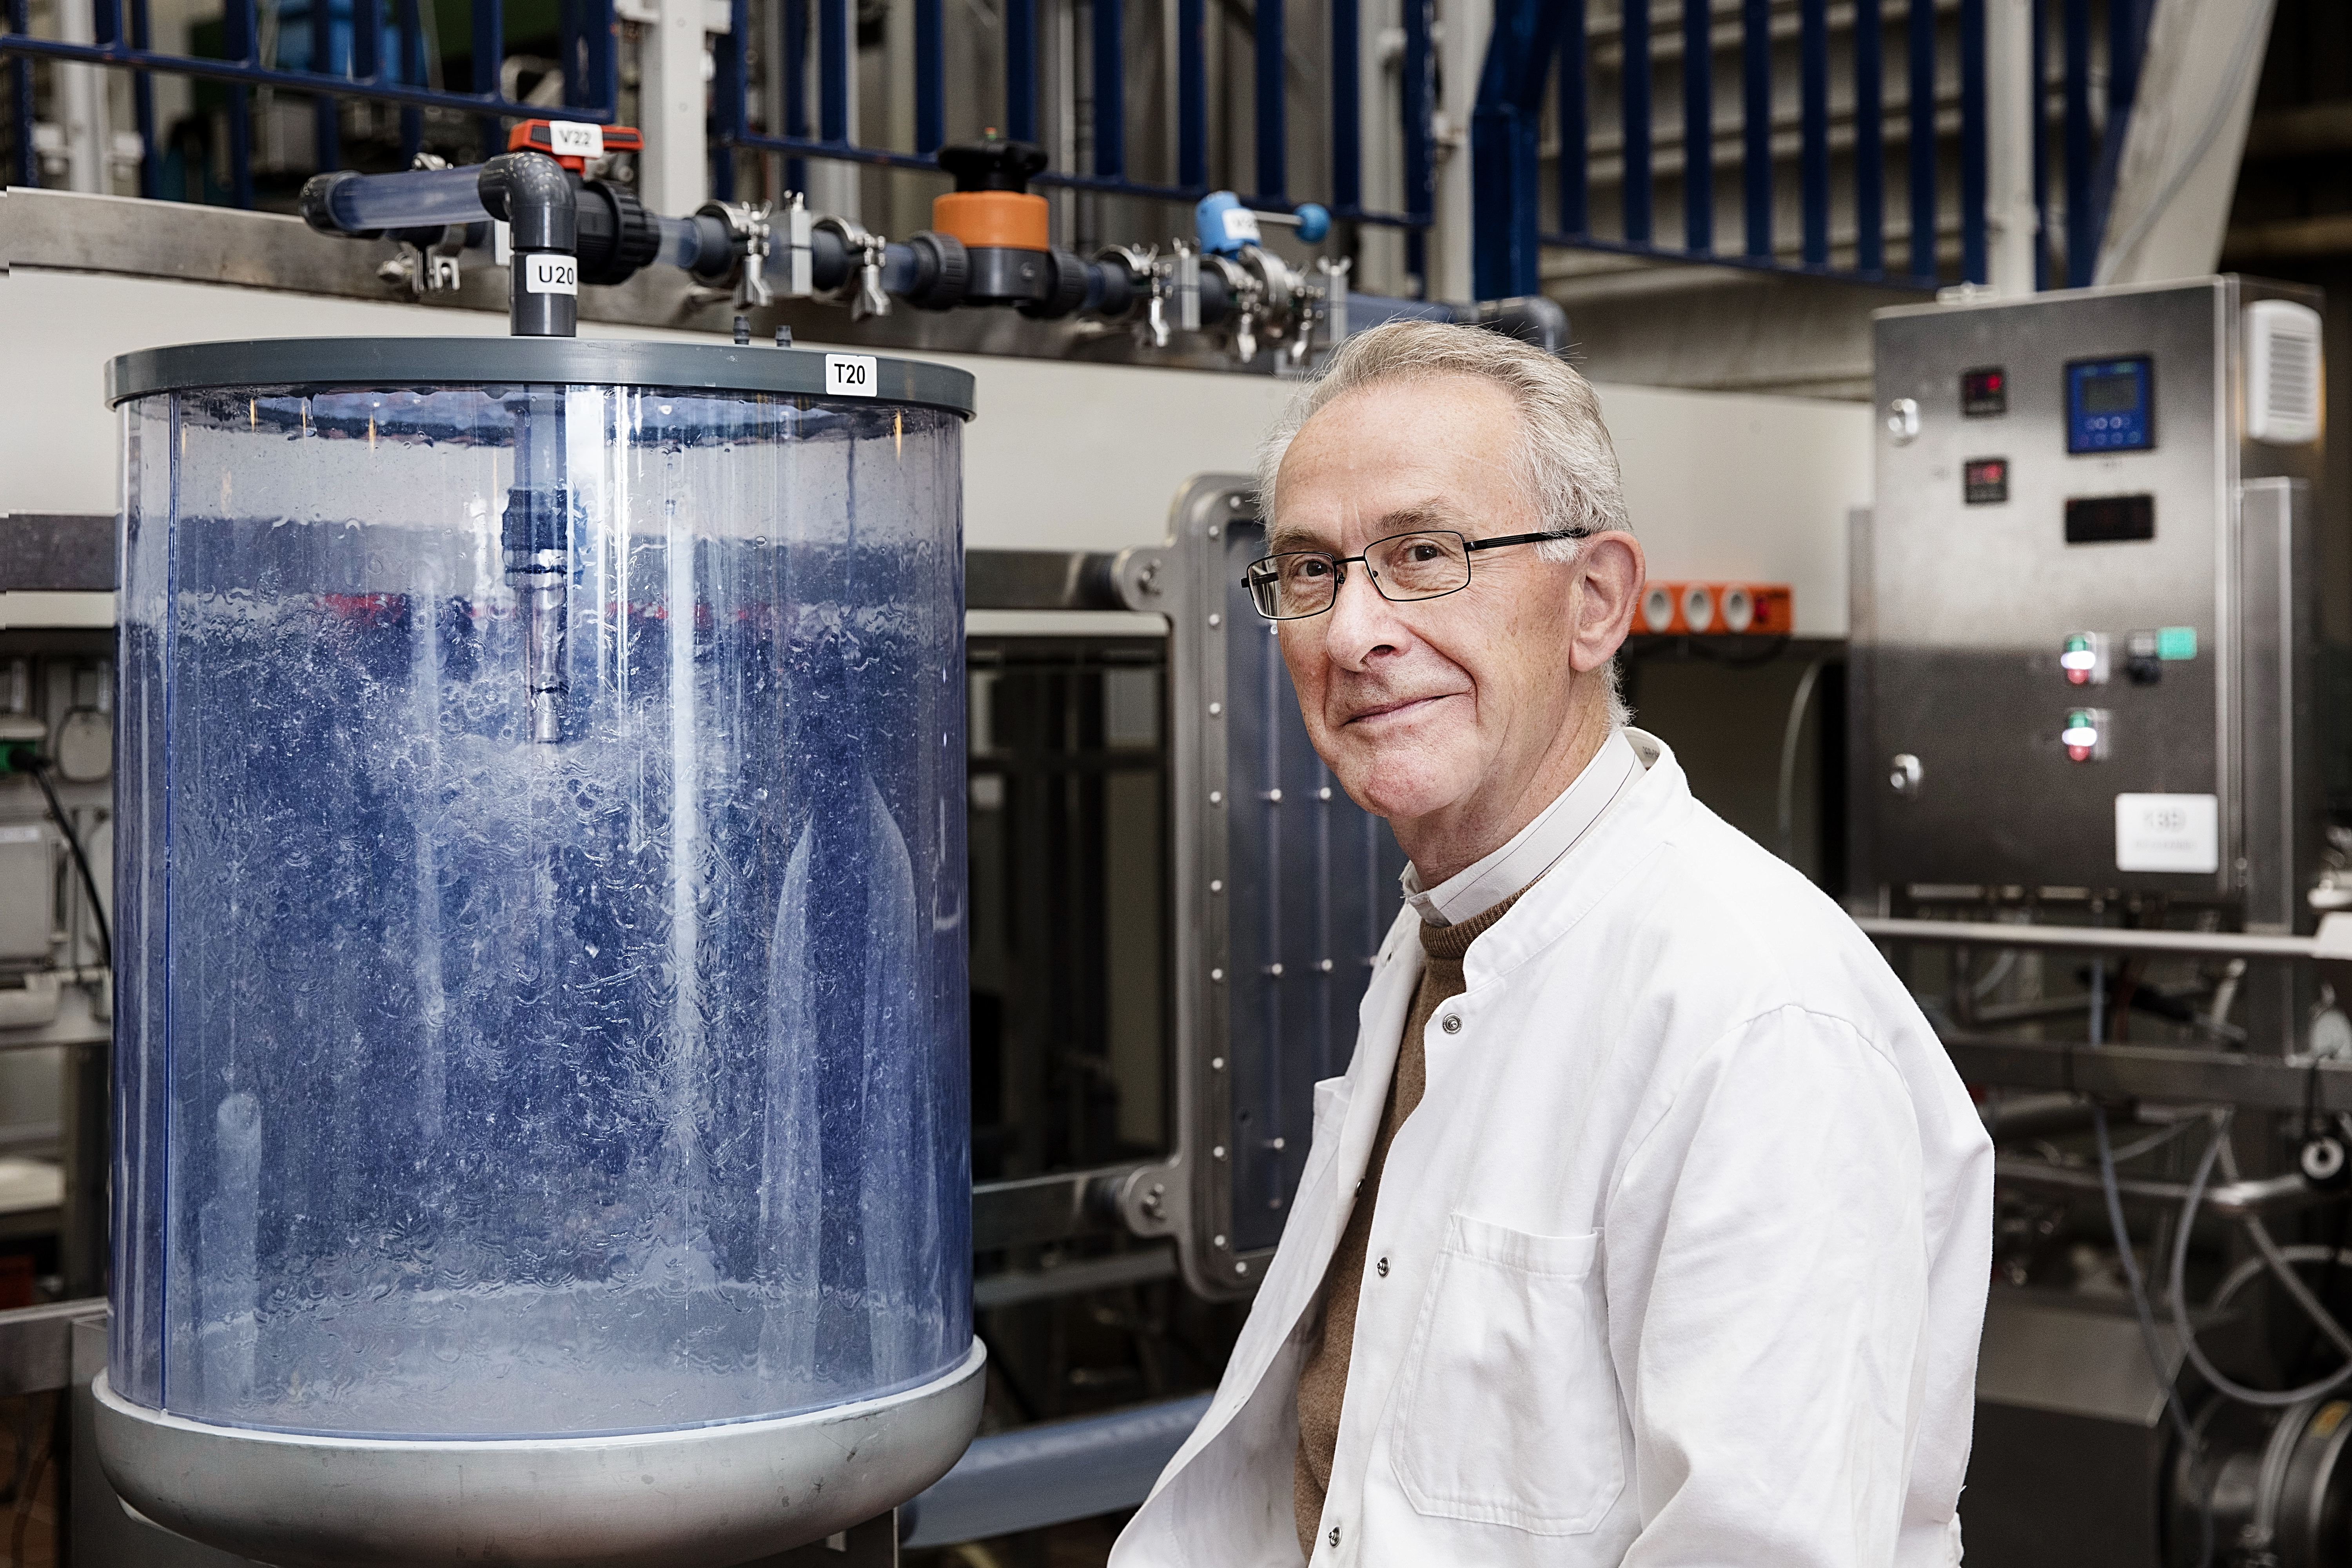 After 12 years at DTU Chemical Engineering Lars Kiørboe has decided to retire. Photo: Thorkild Christensen